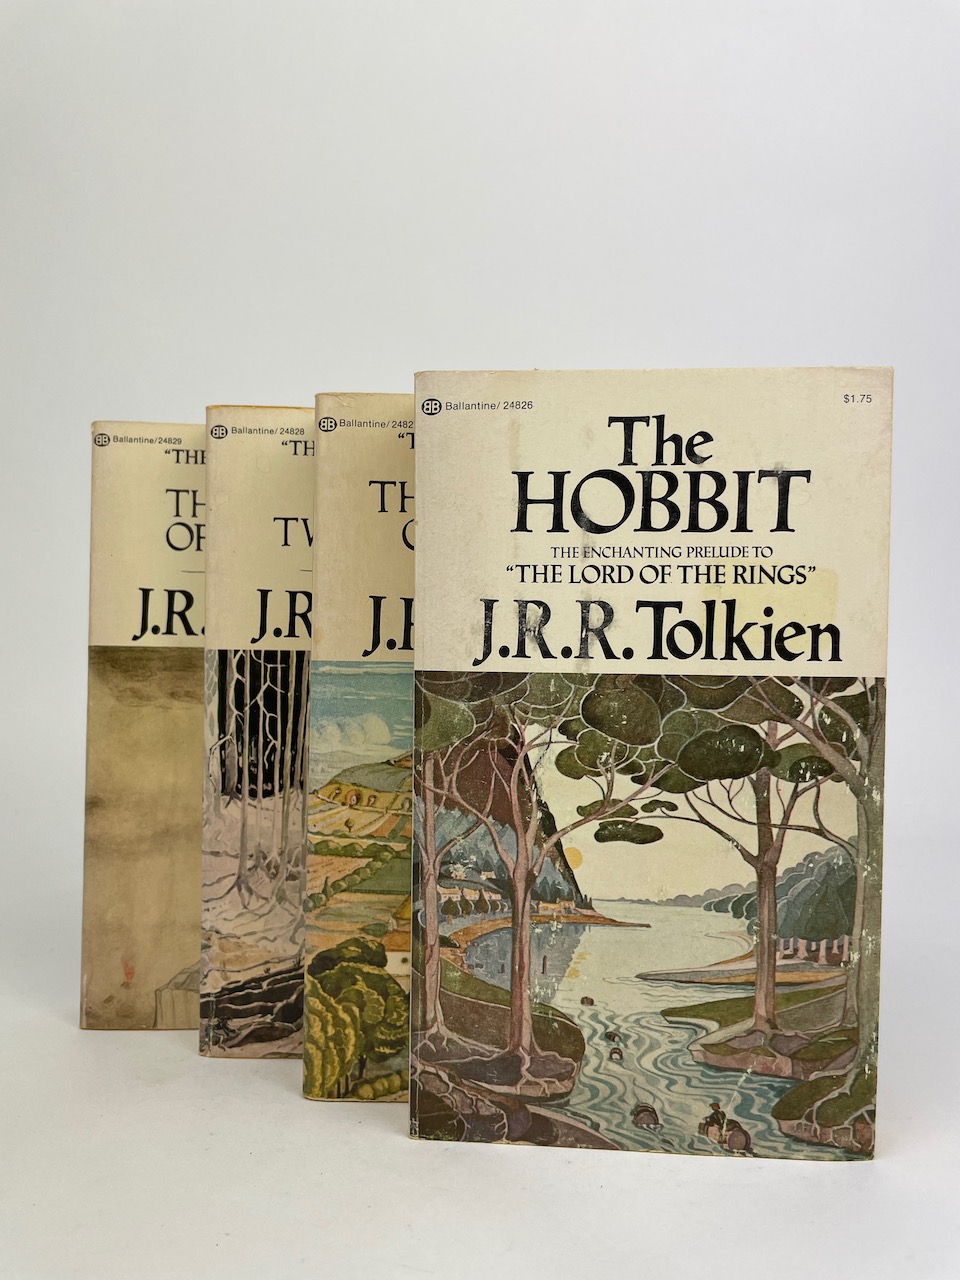 The Hobbit and The Lord of the Rings, Four Paperback Book Boxset from 1975, Gold Slipcase 11